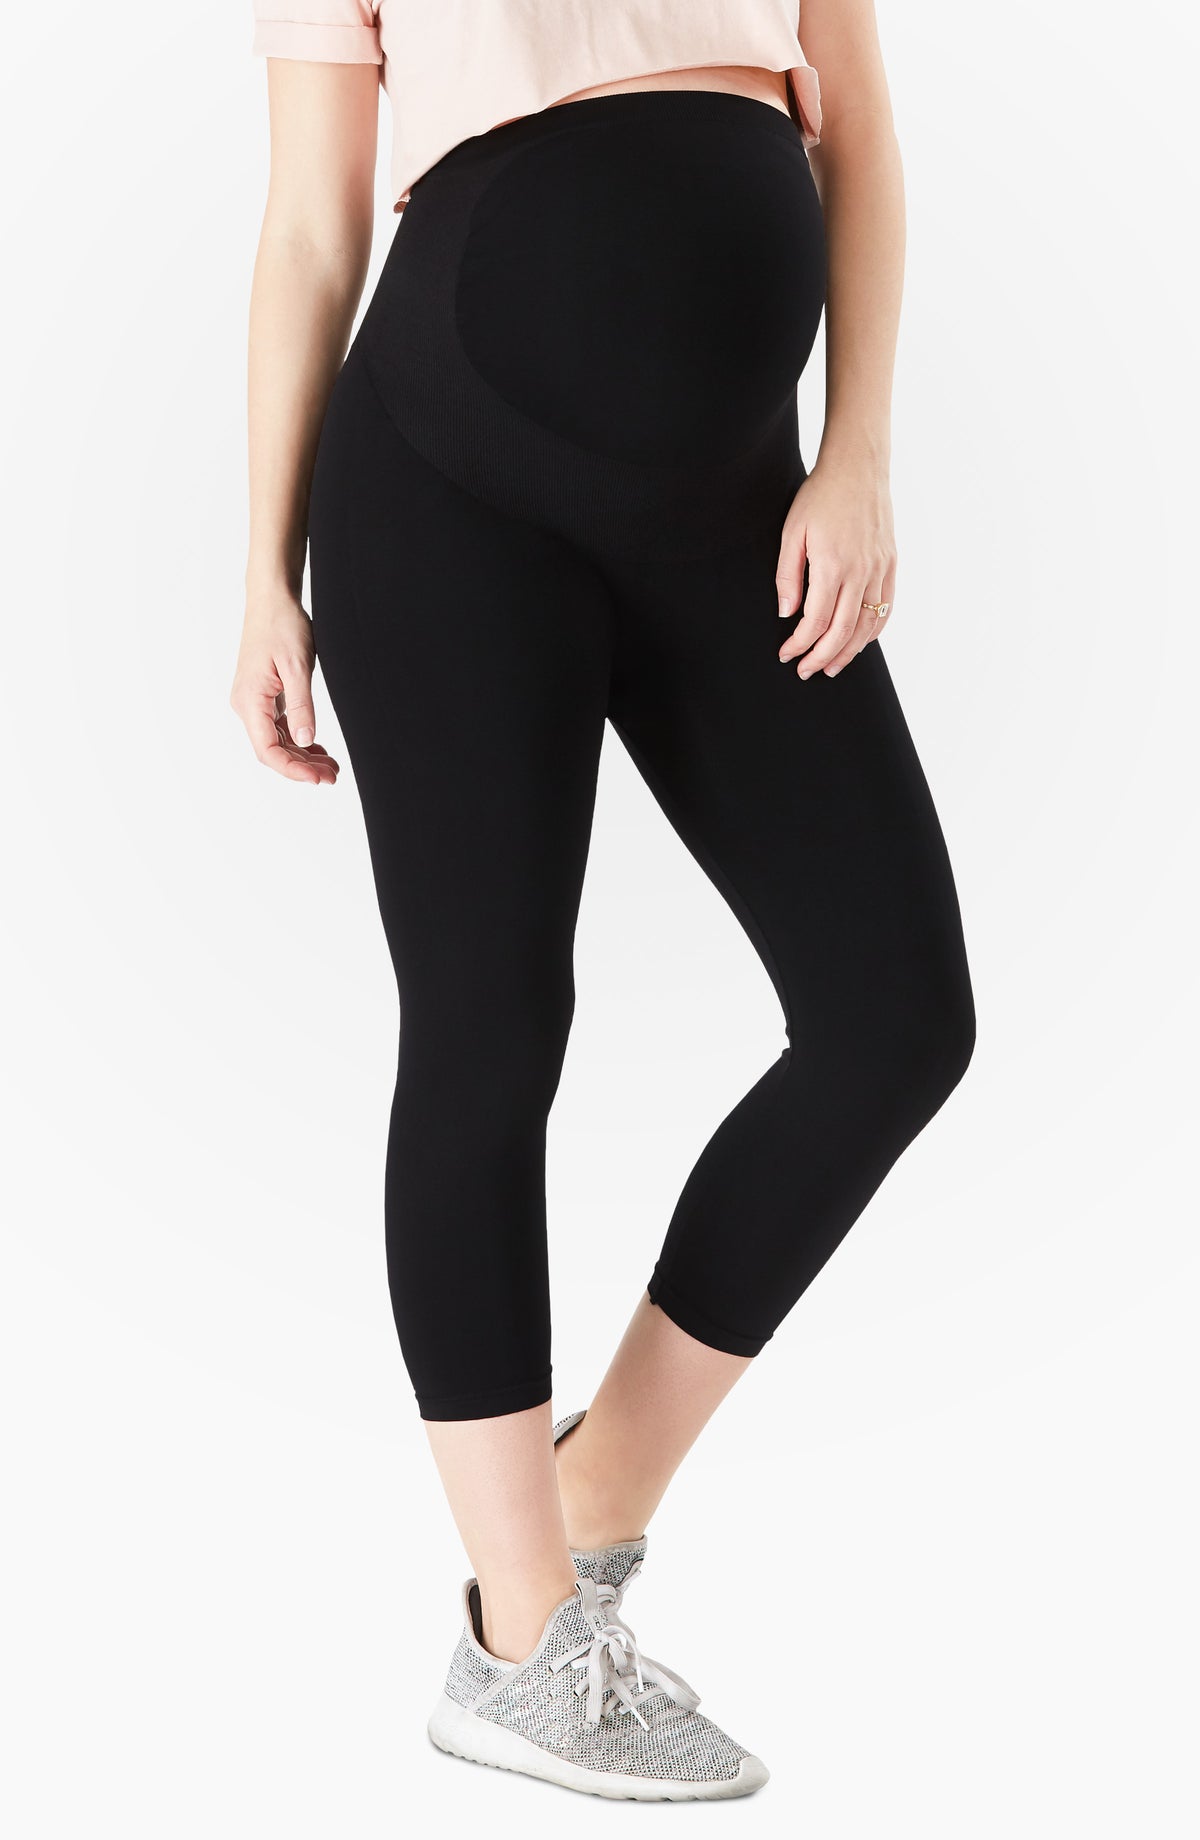 Maternity Black Snatched Rib Bump Support Leggings